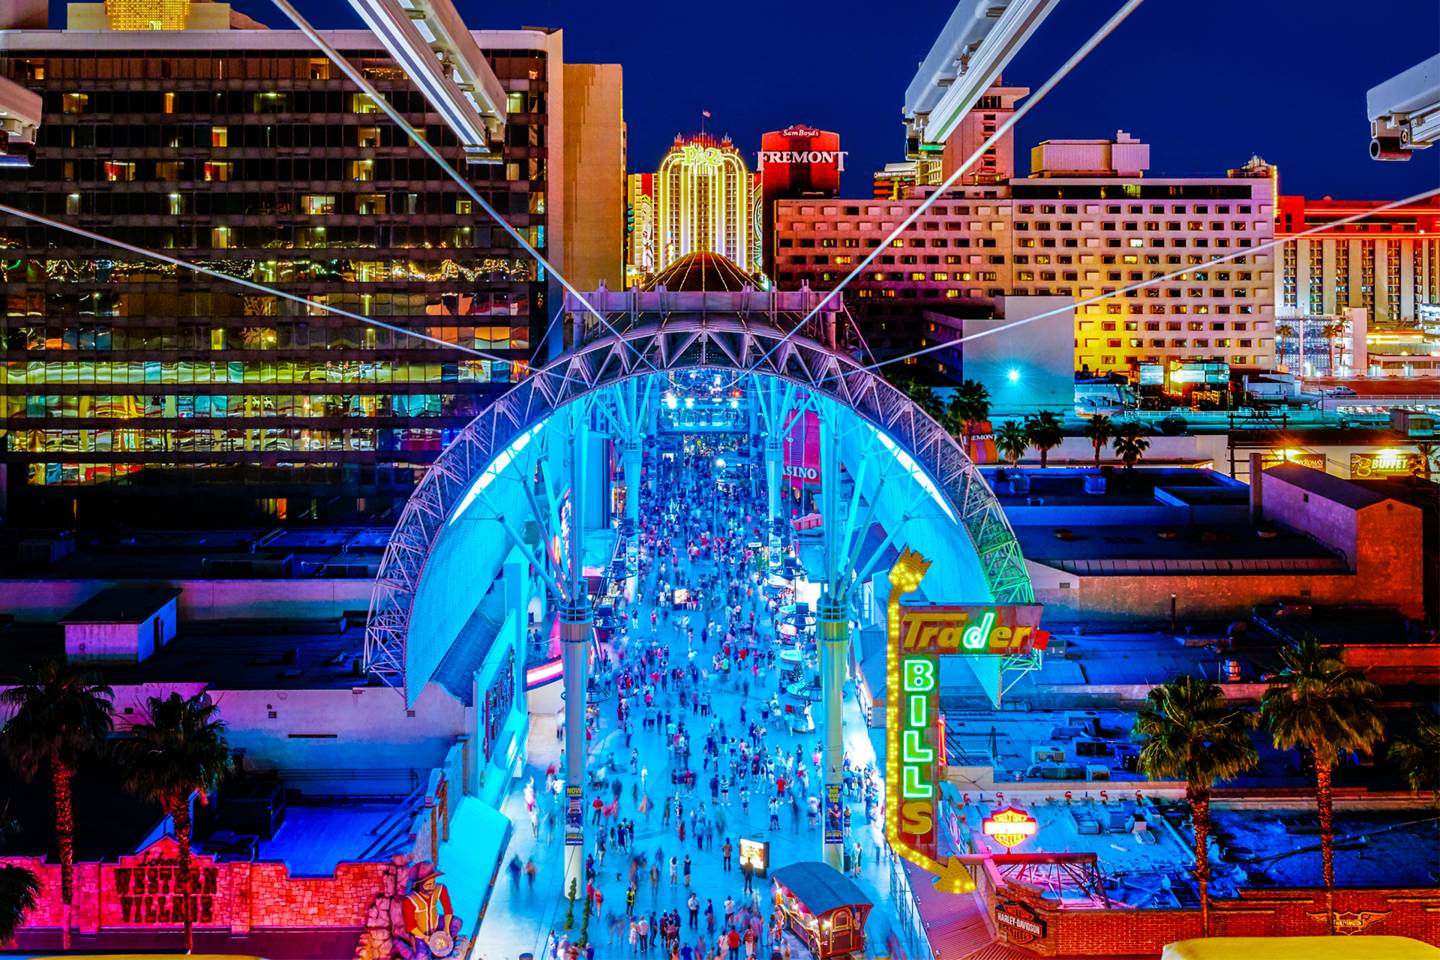 cheap things to do in vegas 2021